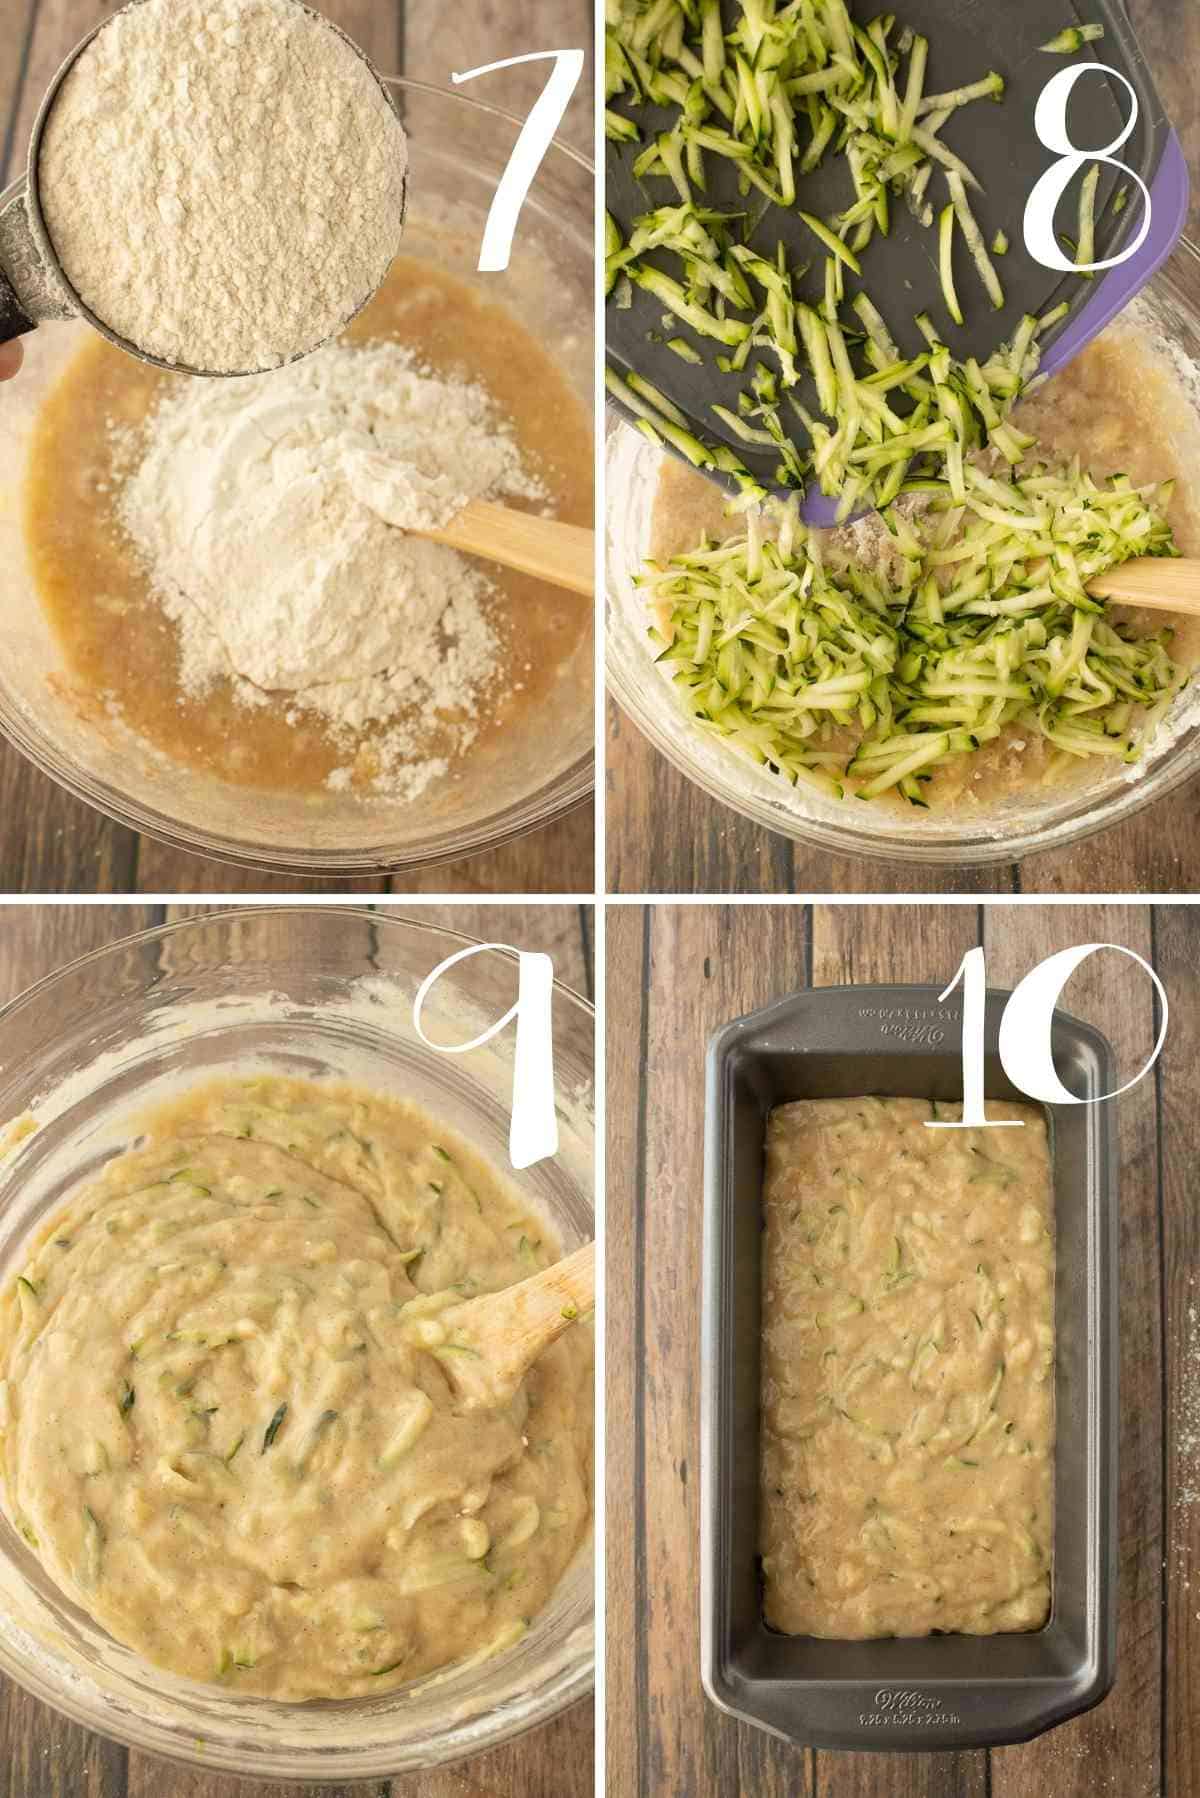 Mix in flour and zucchini, pour in a loaf pan and bake.